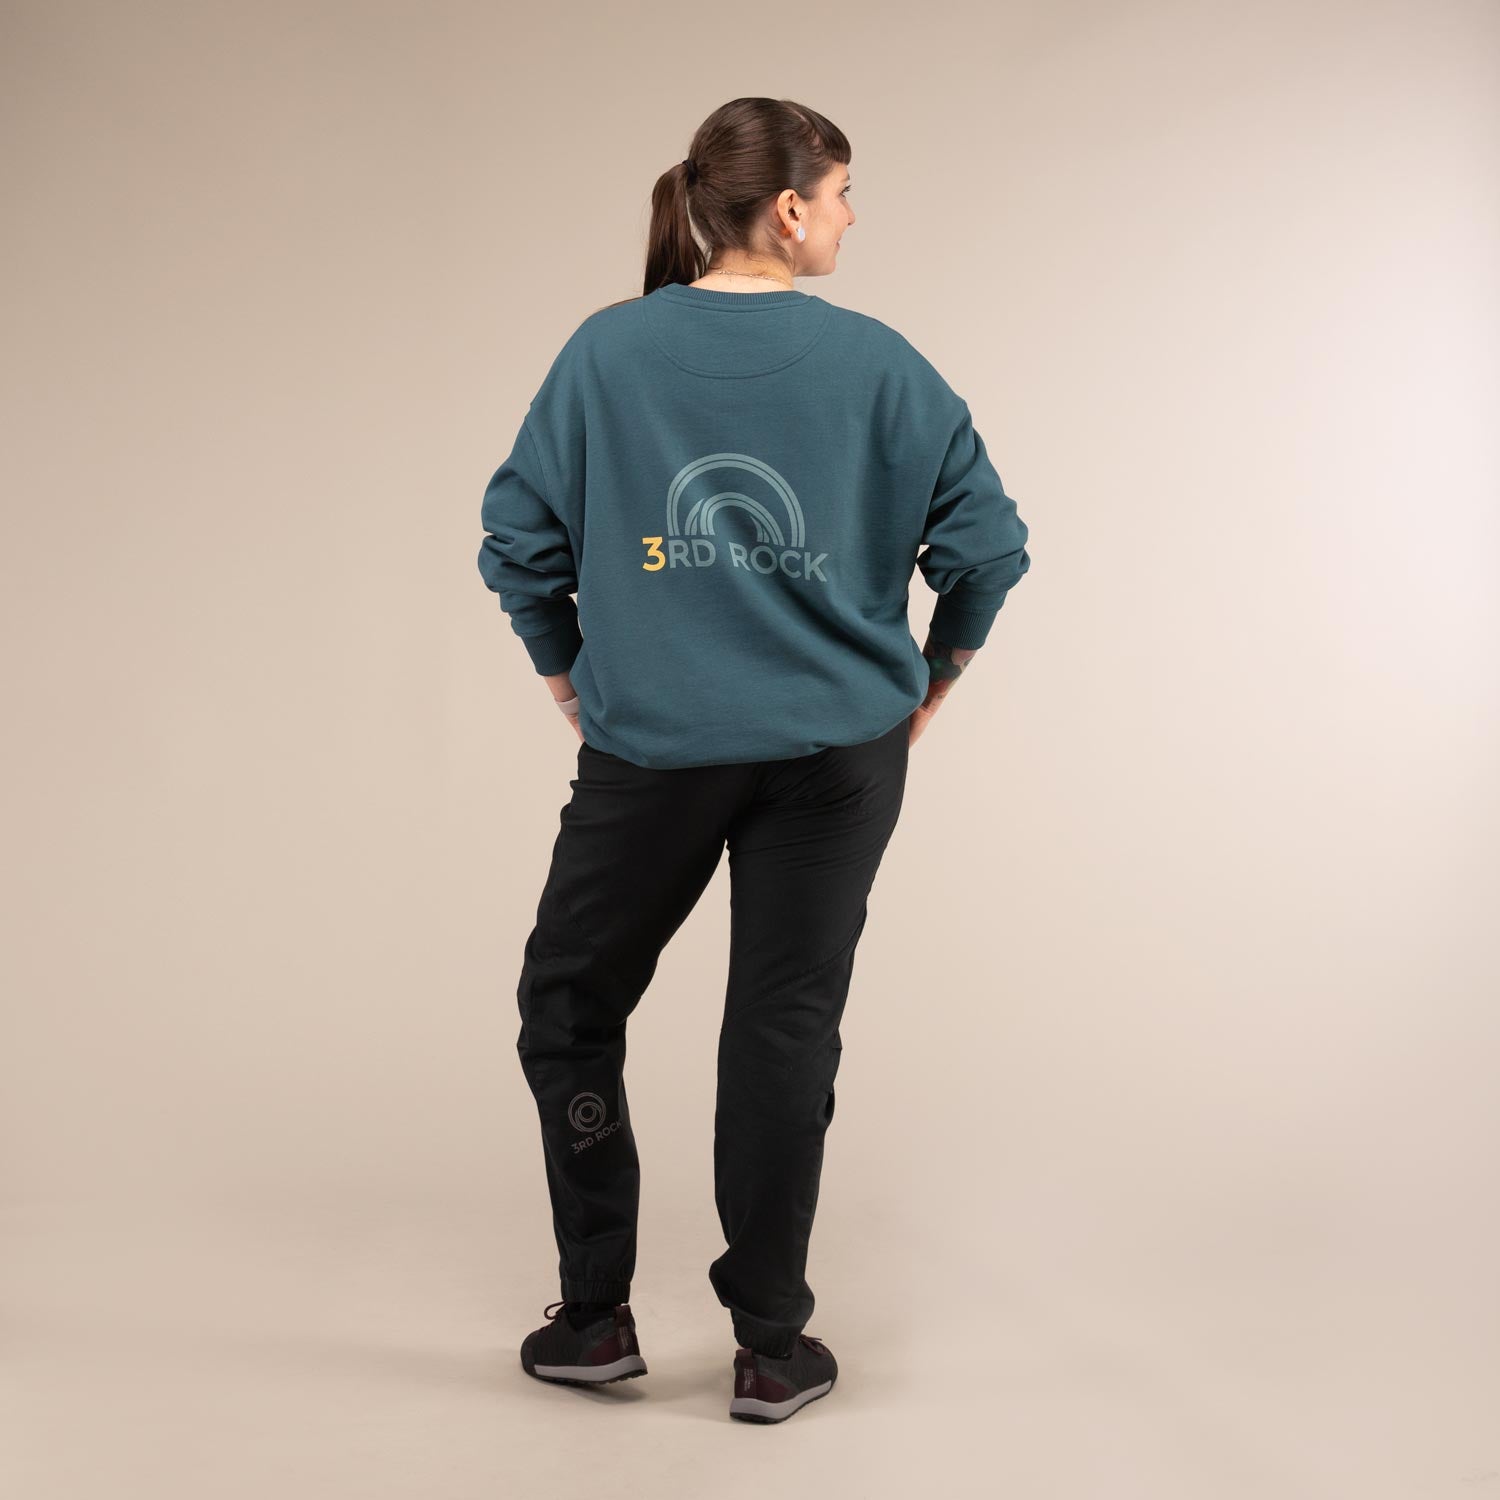 CHARLIE SWEATSHIRT | Oversized Organic Sweatshirt | 3RD ROCK Clothing -  Laura is 5ft 6 with a 36" bust and wears a size M F